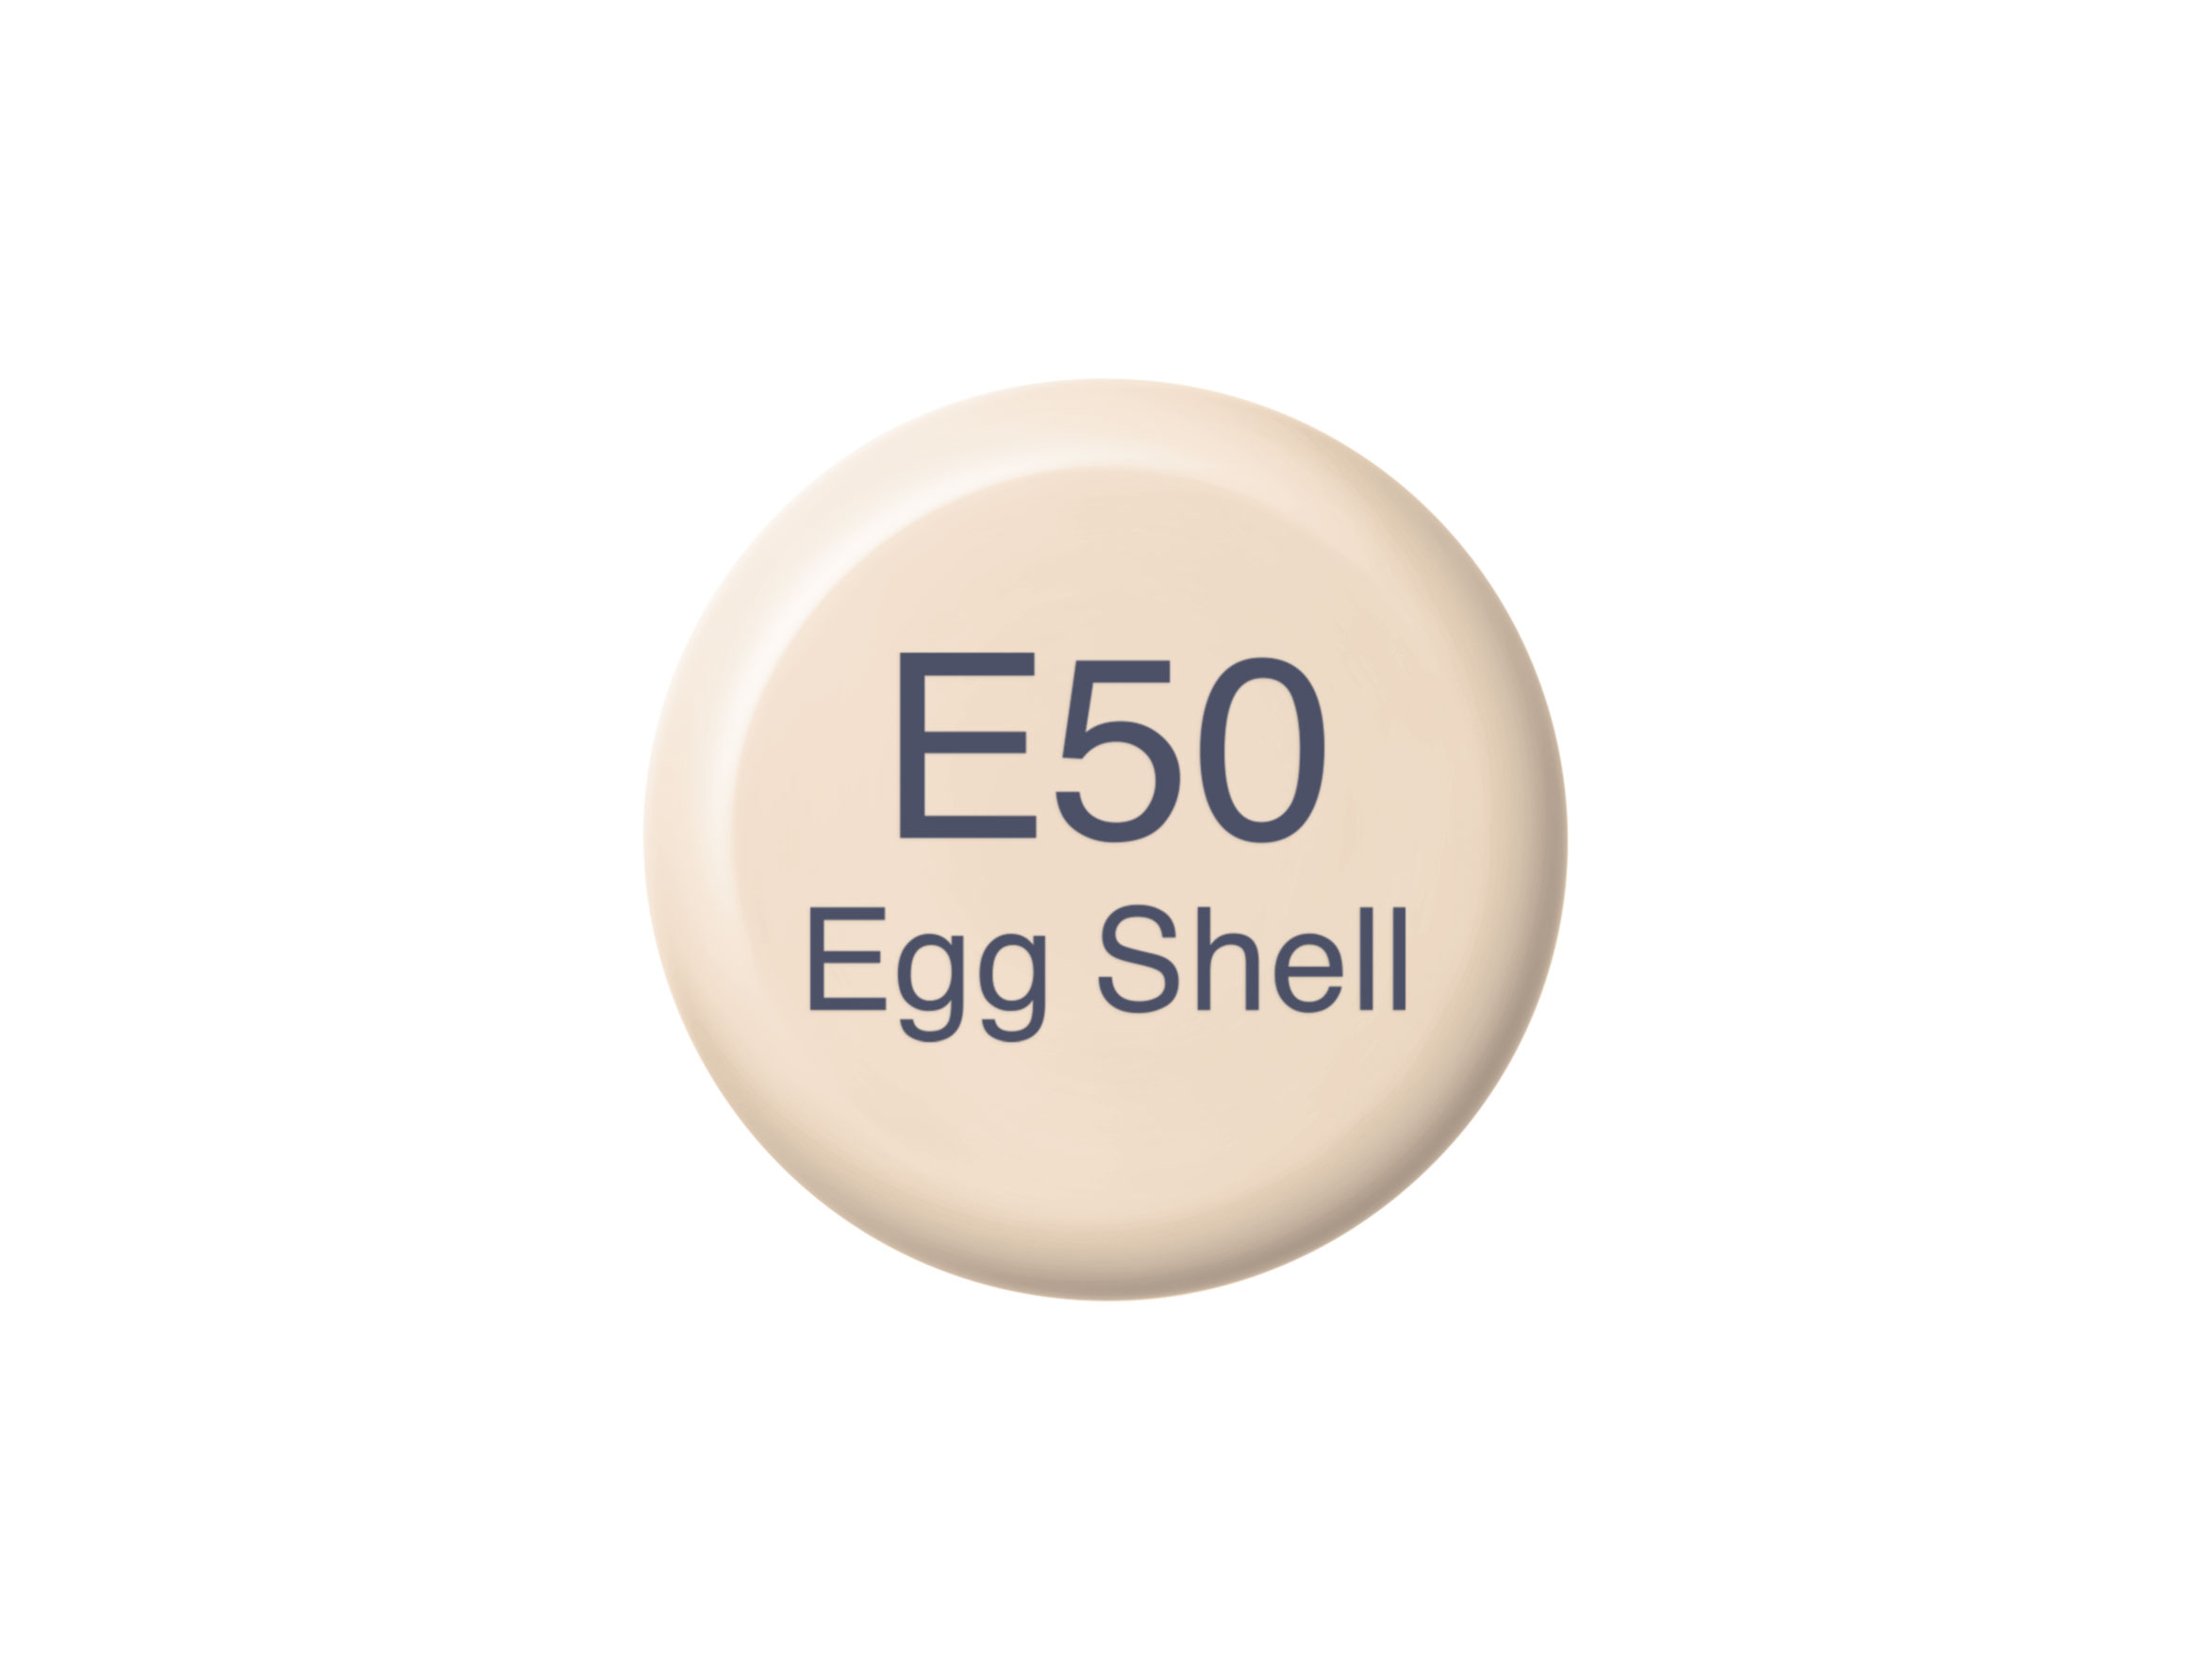 Copic Ink E50 Egg Shell